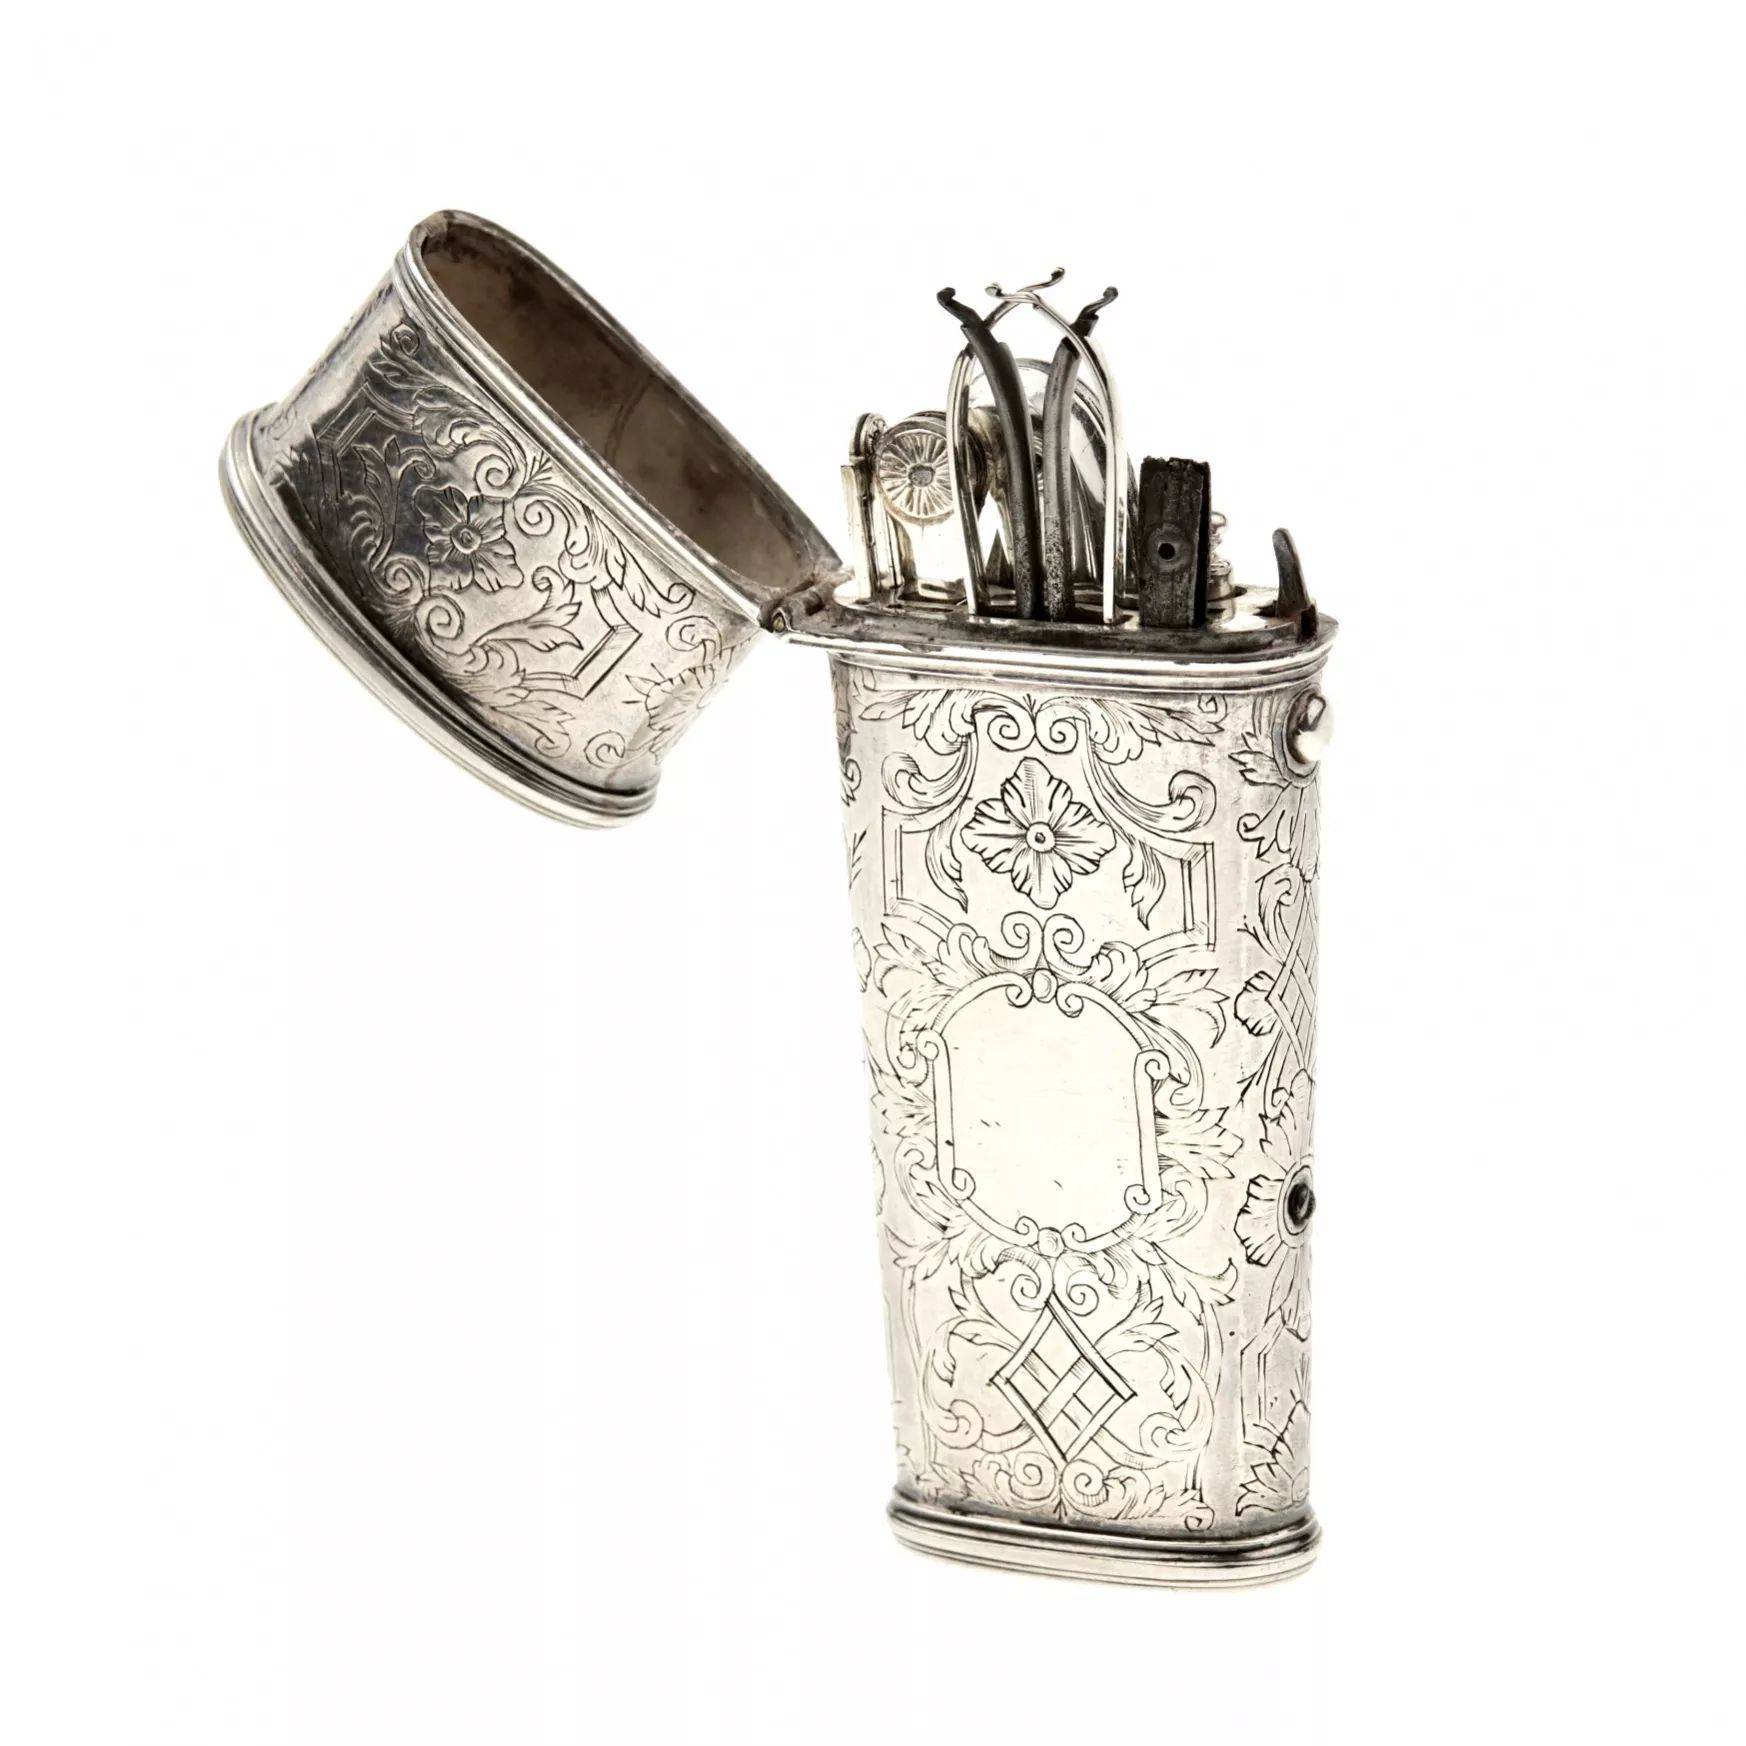 Silver-travel-necessaire-from-the-18th-century